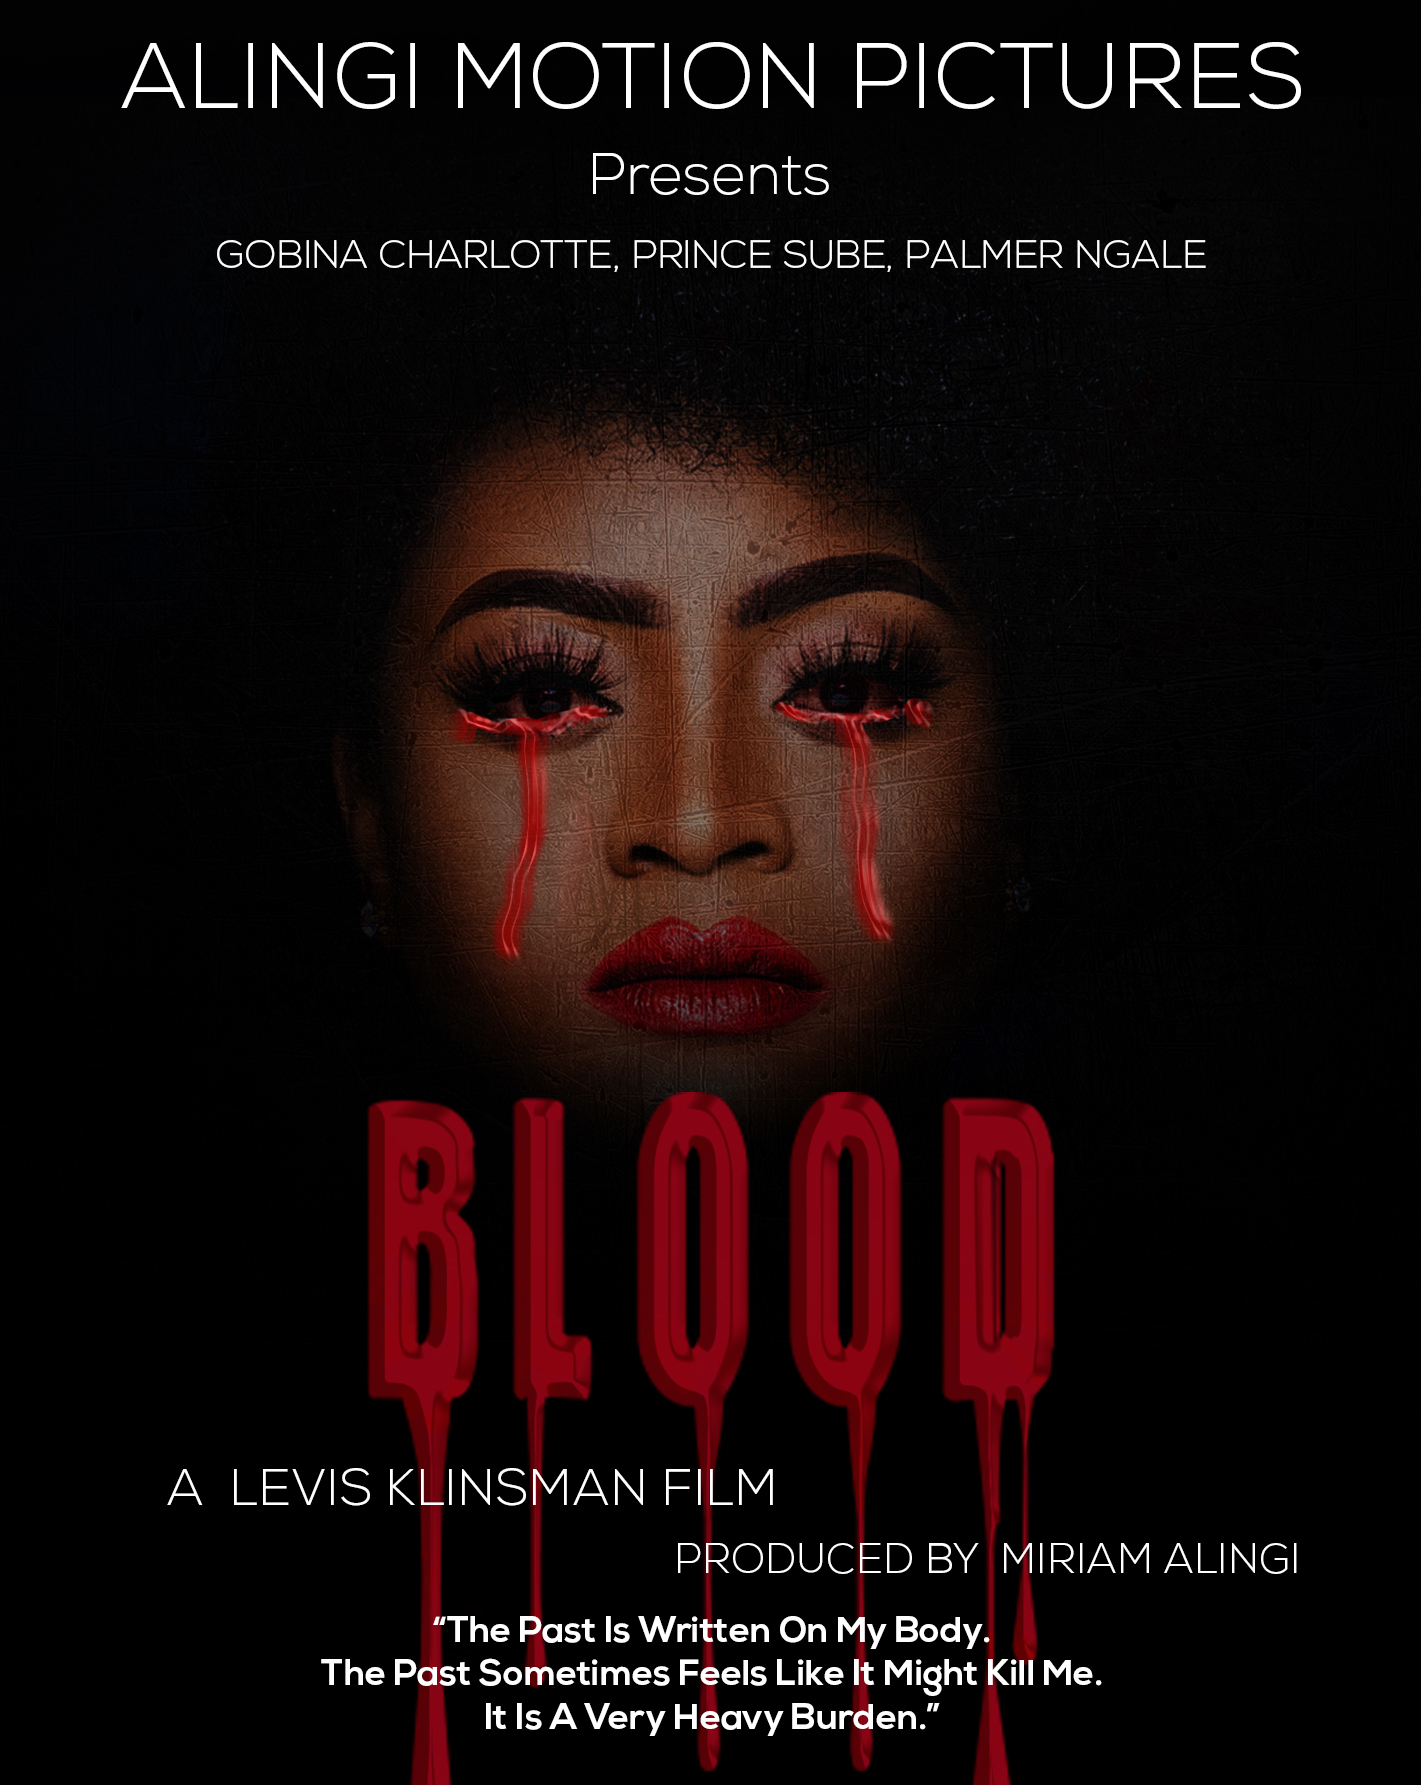 ALINGI MOTION PICTURES SET TO SCREEN NEW MOVIE TITLED “BLOOD”